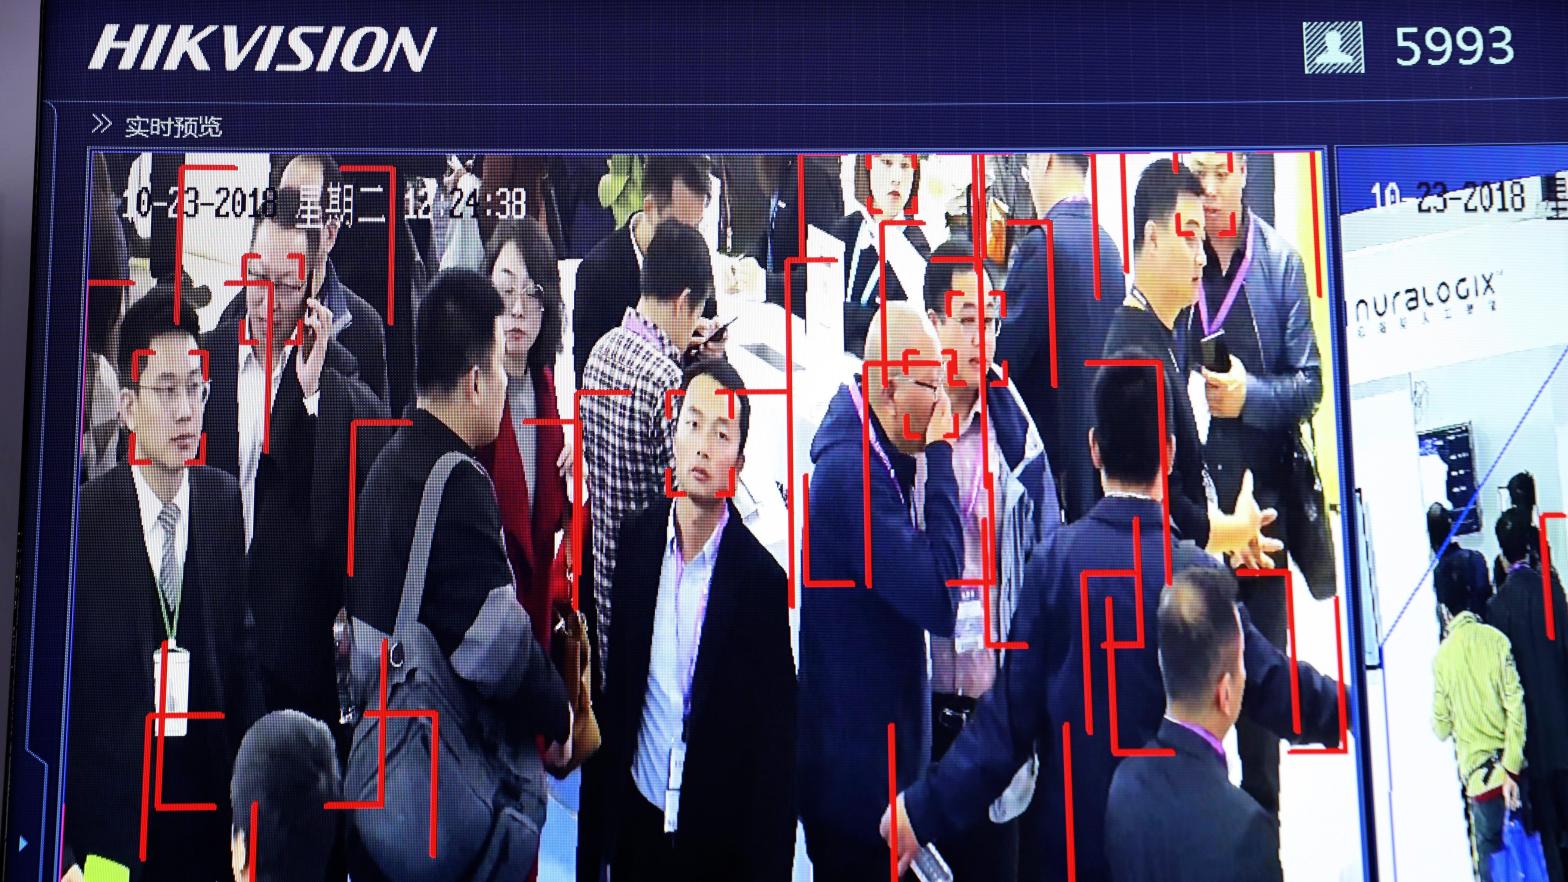 In this photo taken Tuesday, Oct. 23, 2018, visitors are tracked by facial recognition technology from state-owned surveillance equipment manufacturer Hikvision at the Security China 2018 expo in Beijing, China. (Photo: Ng Han Guan, AP)